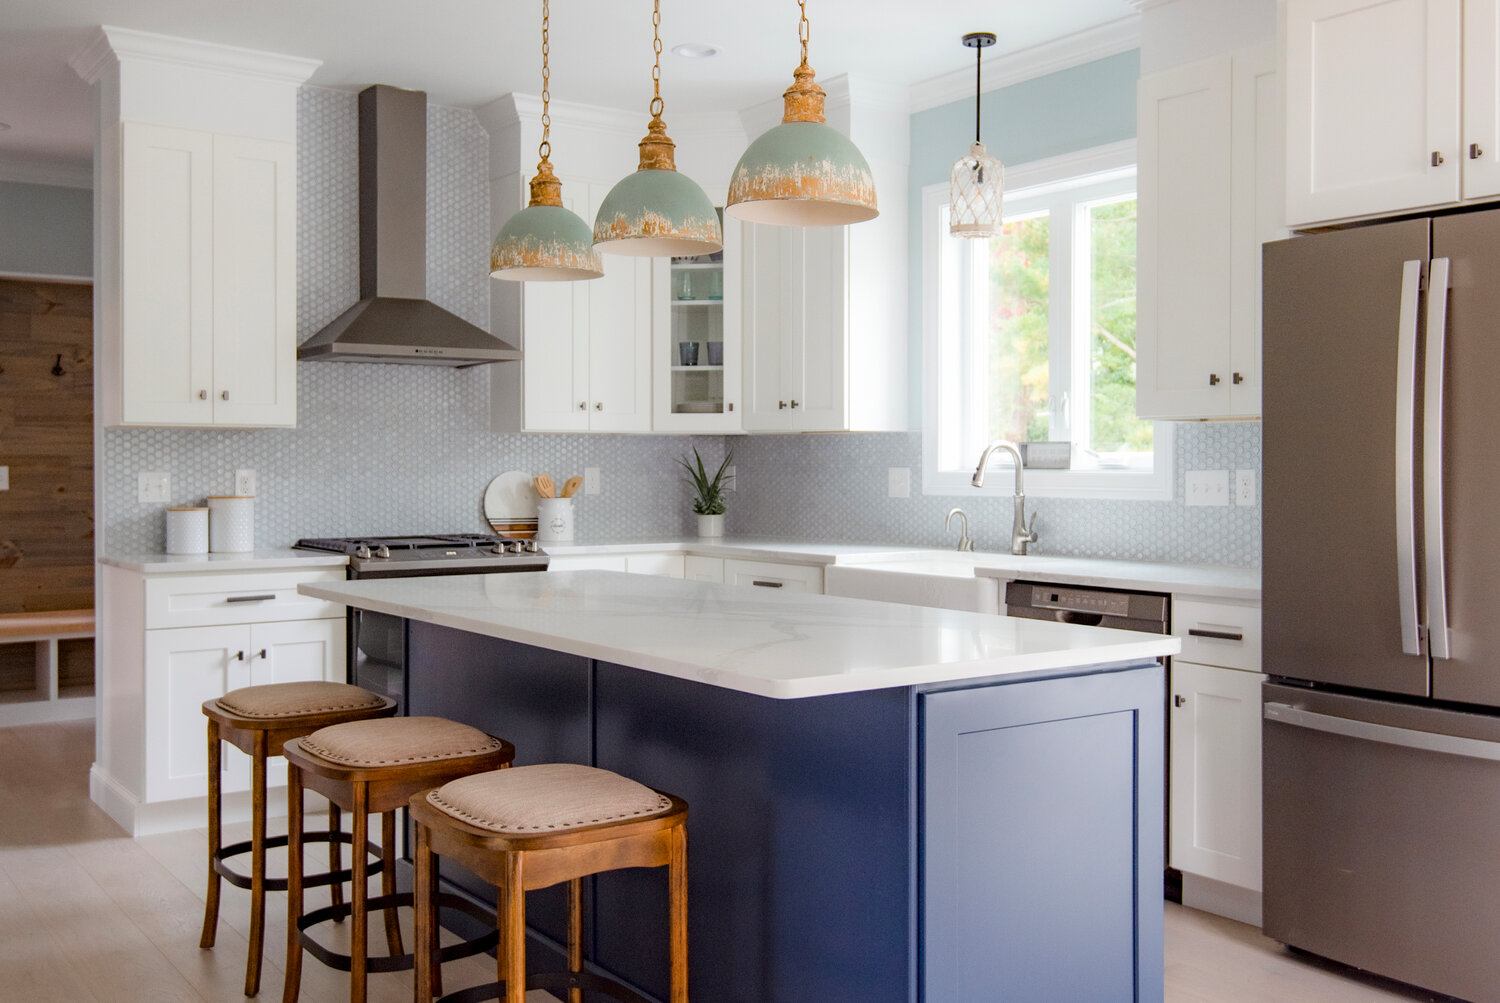 A range of blues adds unexpected panache in the kitchen